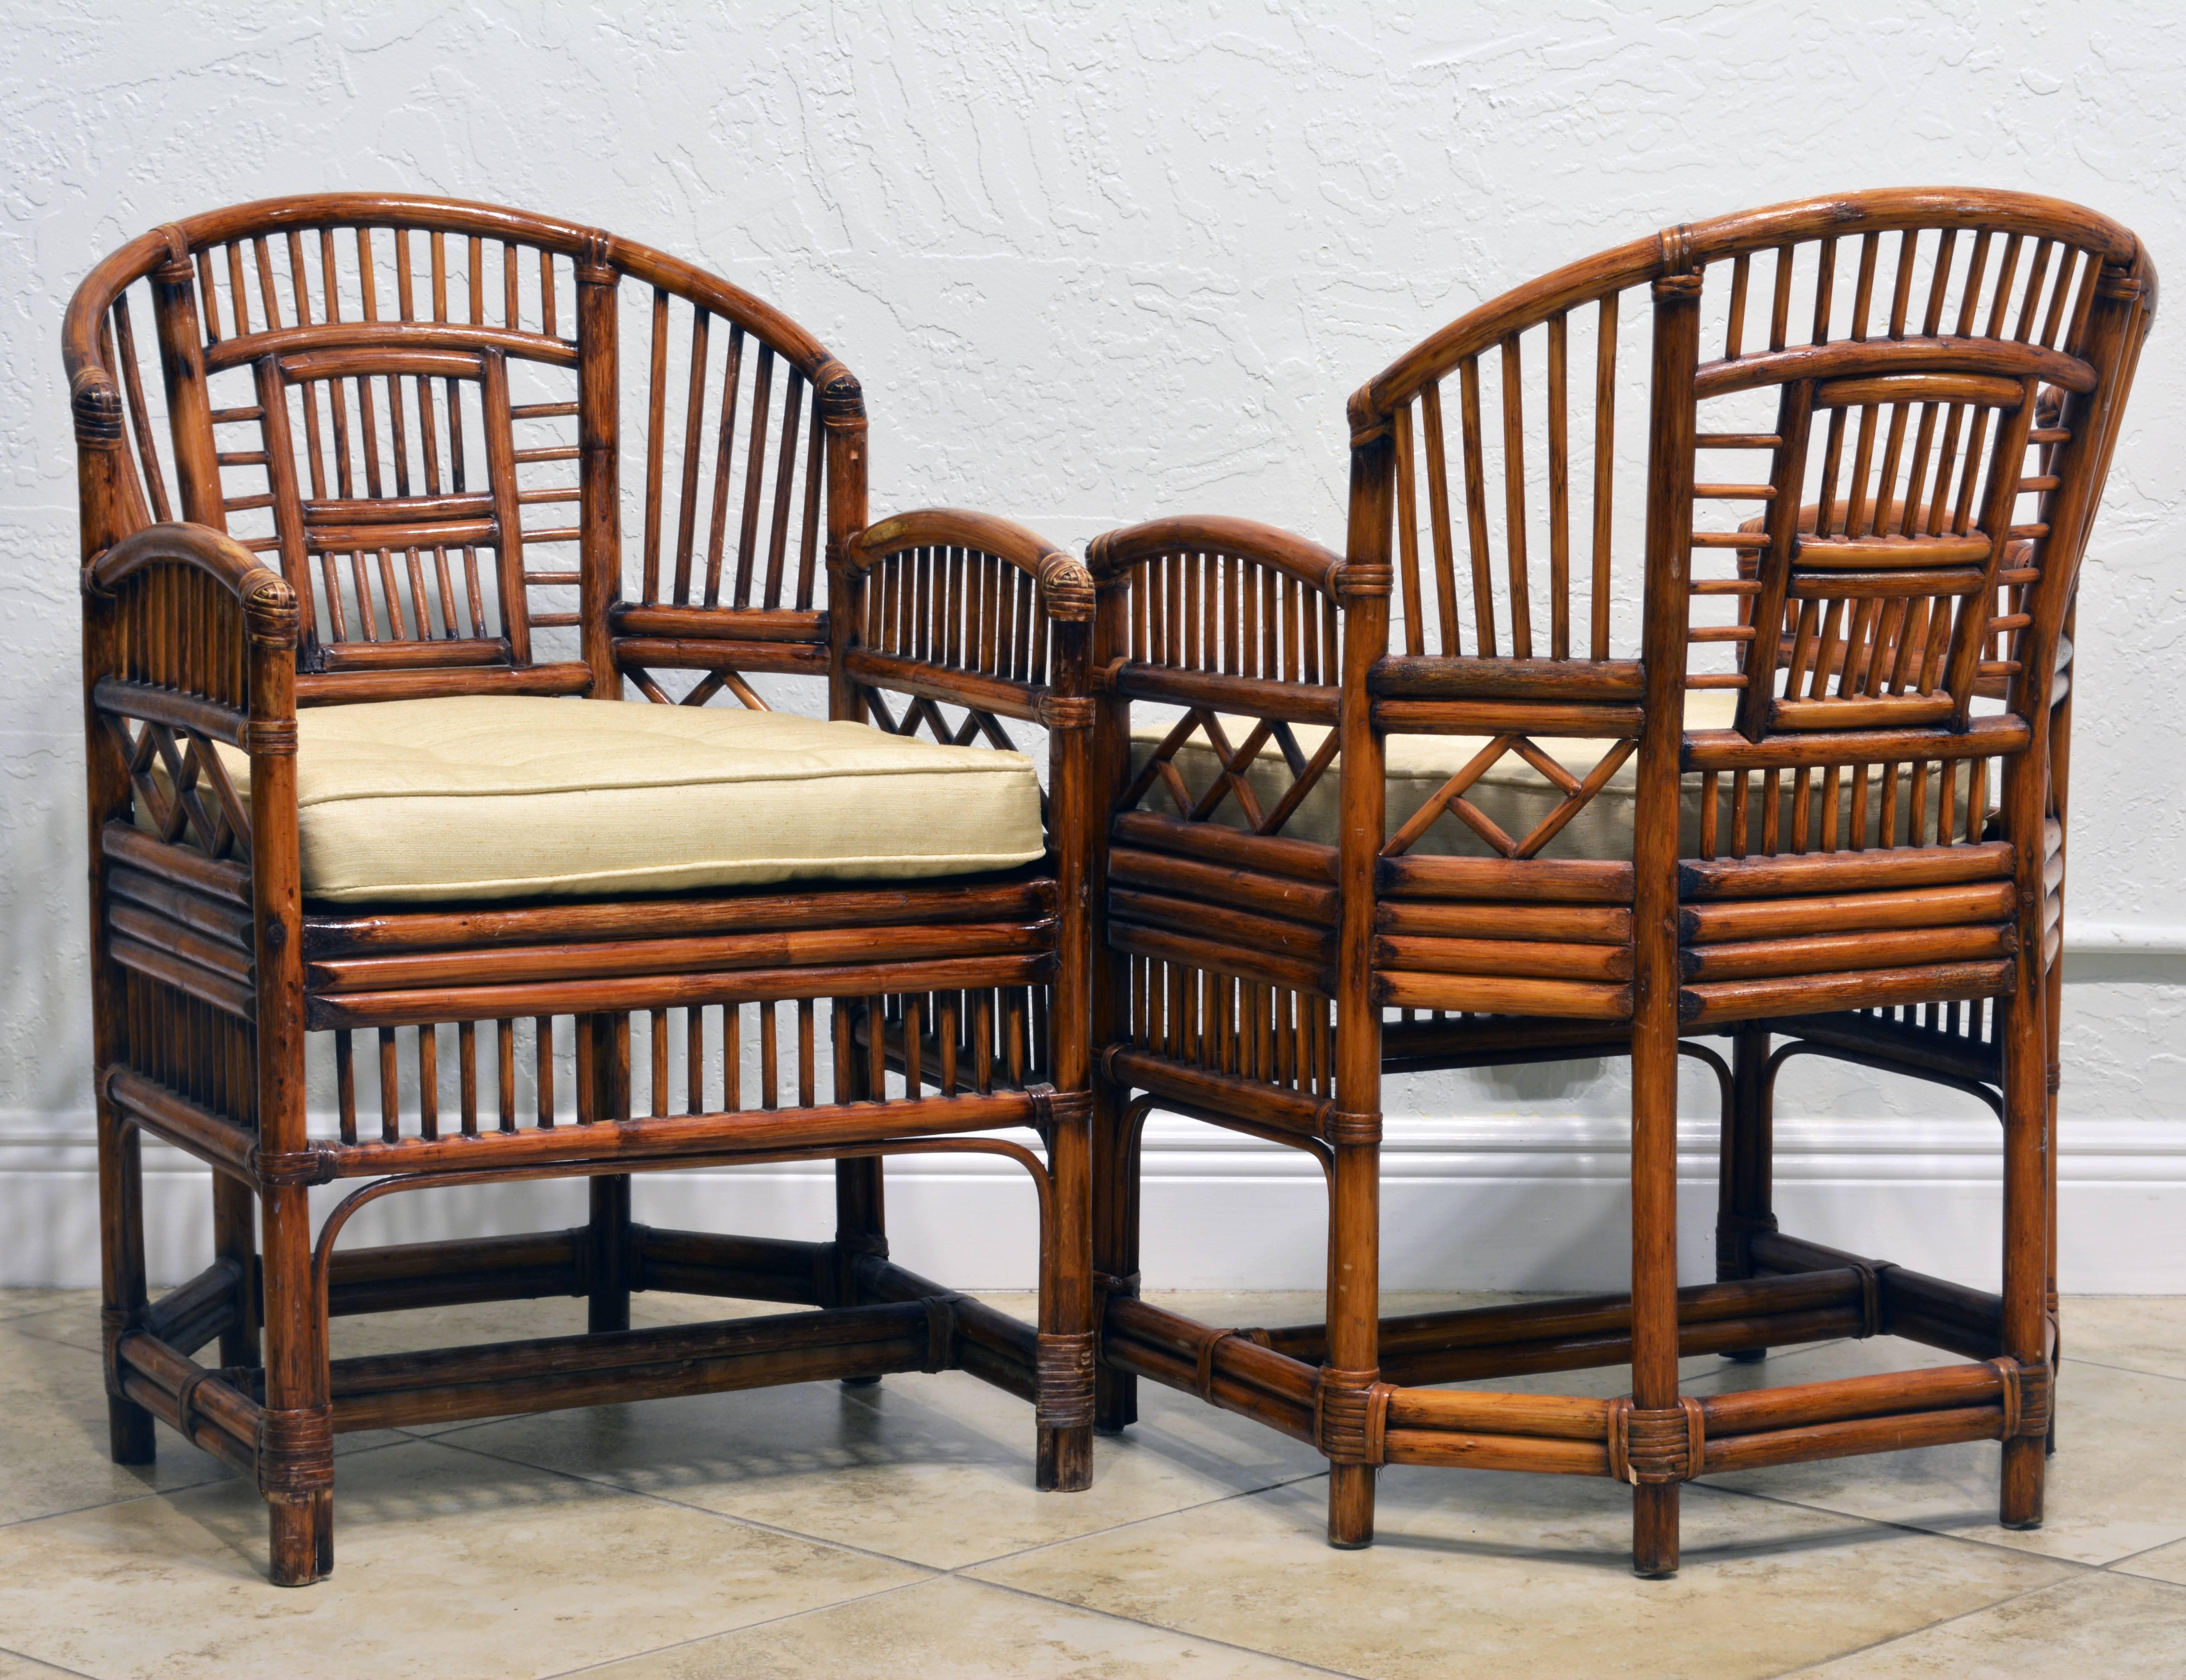 Rising on six legs these intricately crafted iconic chairs with cane seats feature bamboo frames and Chinese themed bamboo open work inspired by Chippendale design. The chairs come with new off-white silk cushions in pristine condition.